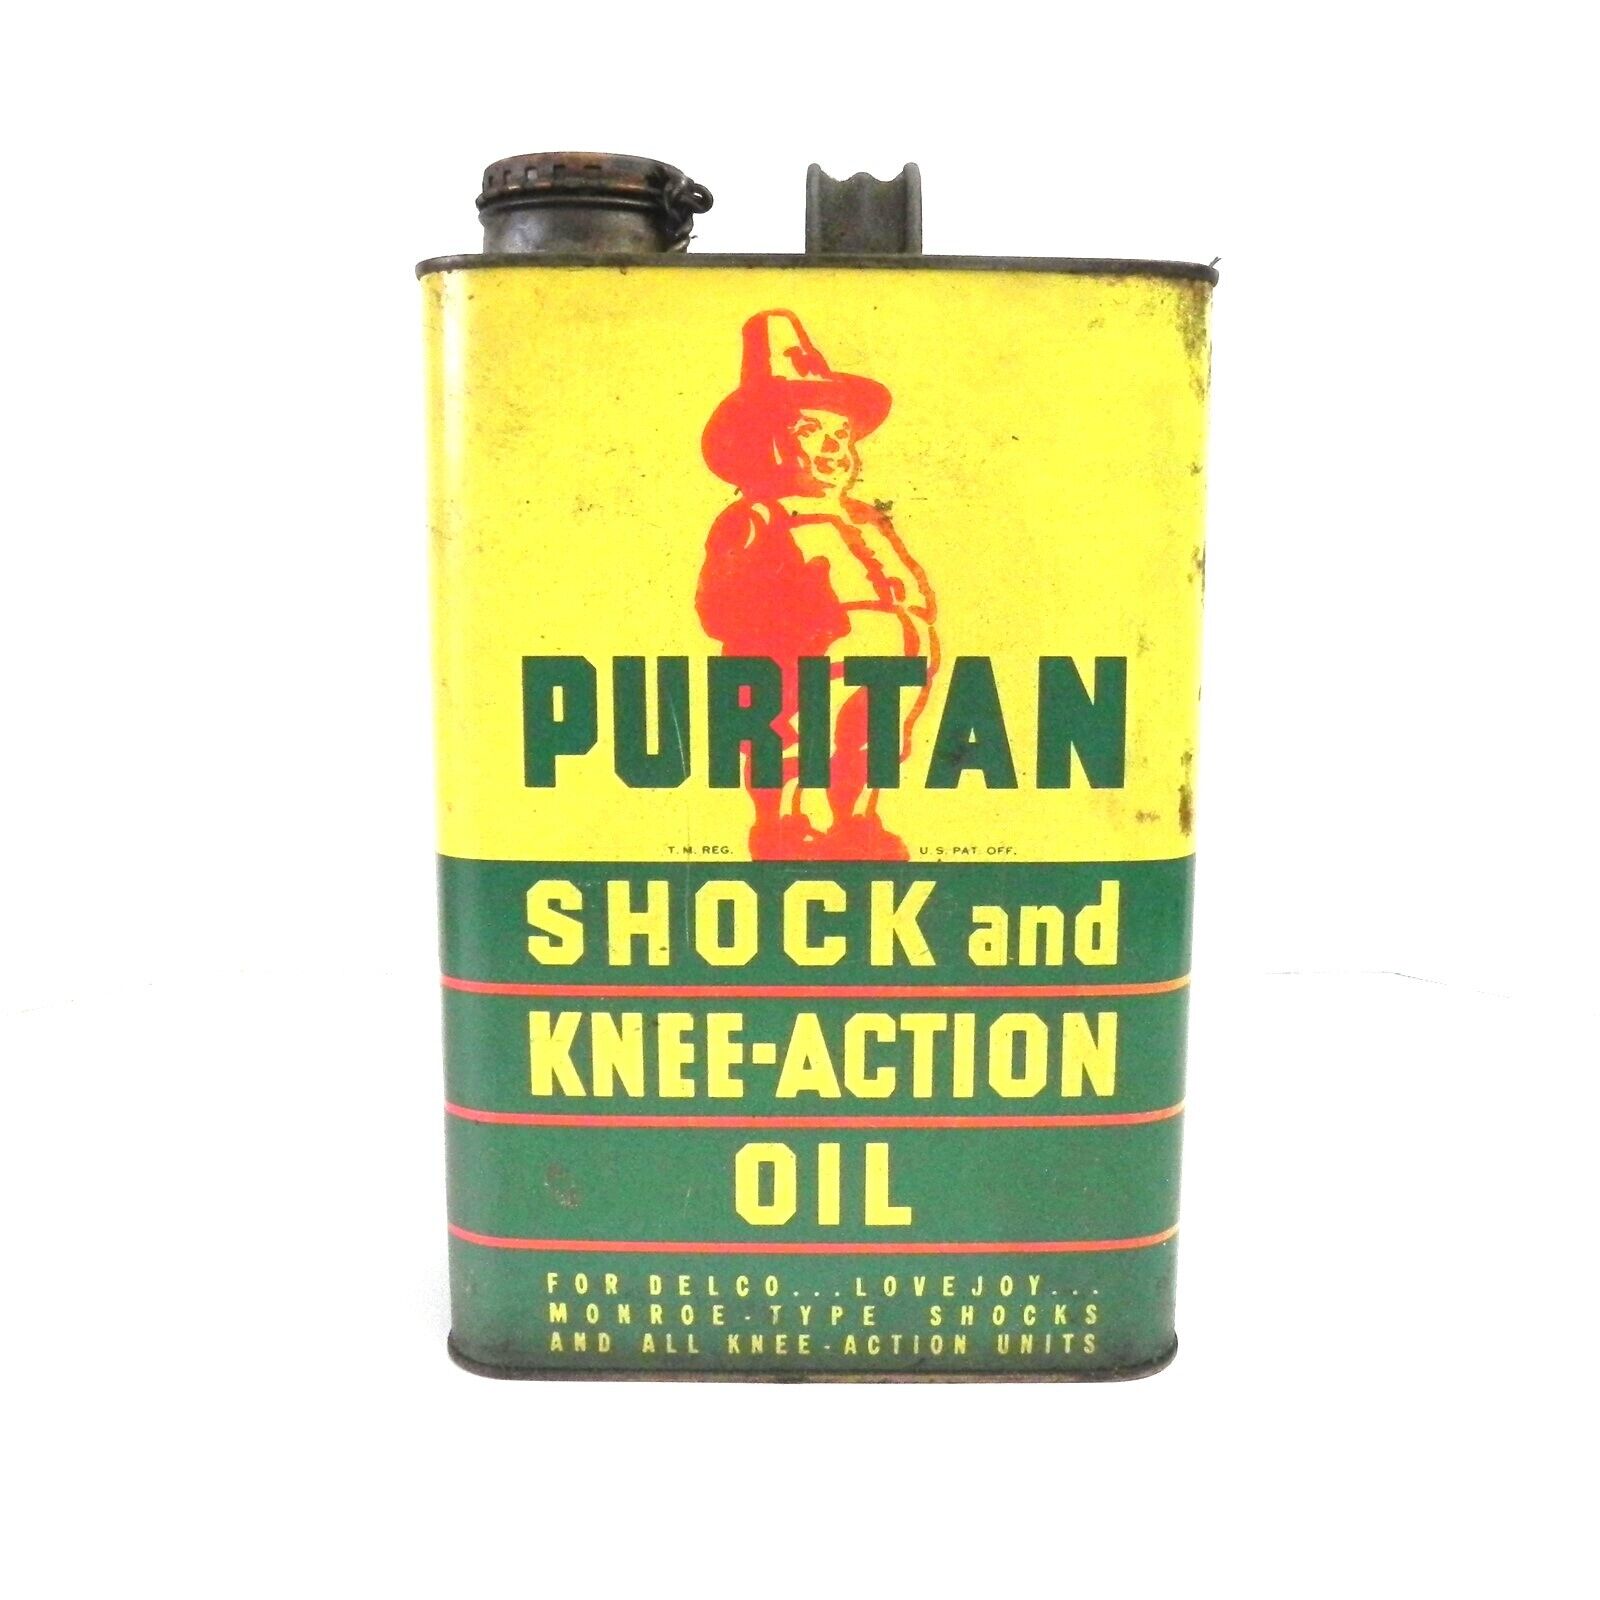 VINTAGE PURITAN SHOCK & KNEE-ACTION OIL 1 GALLON CAN EMPTY USED COLLECTABLE CAN